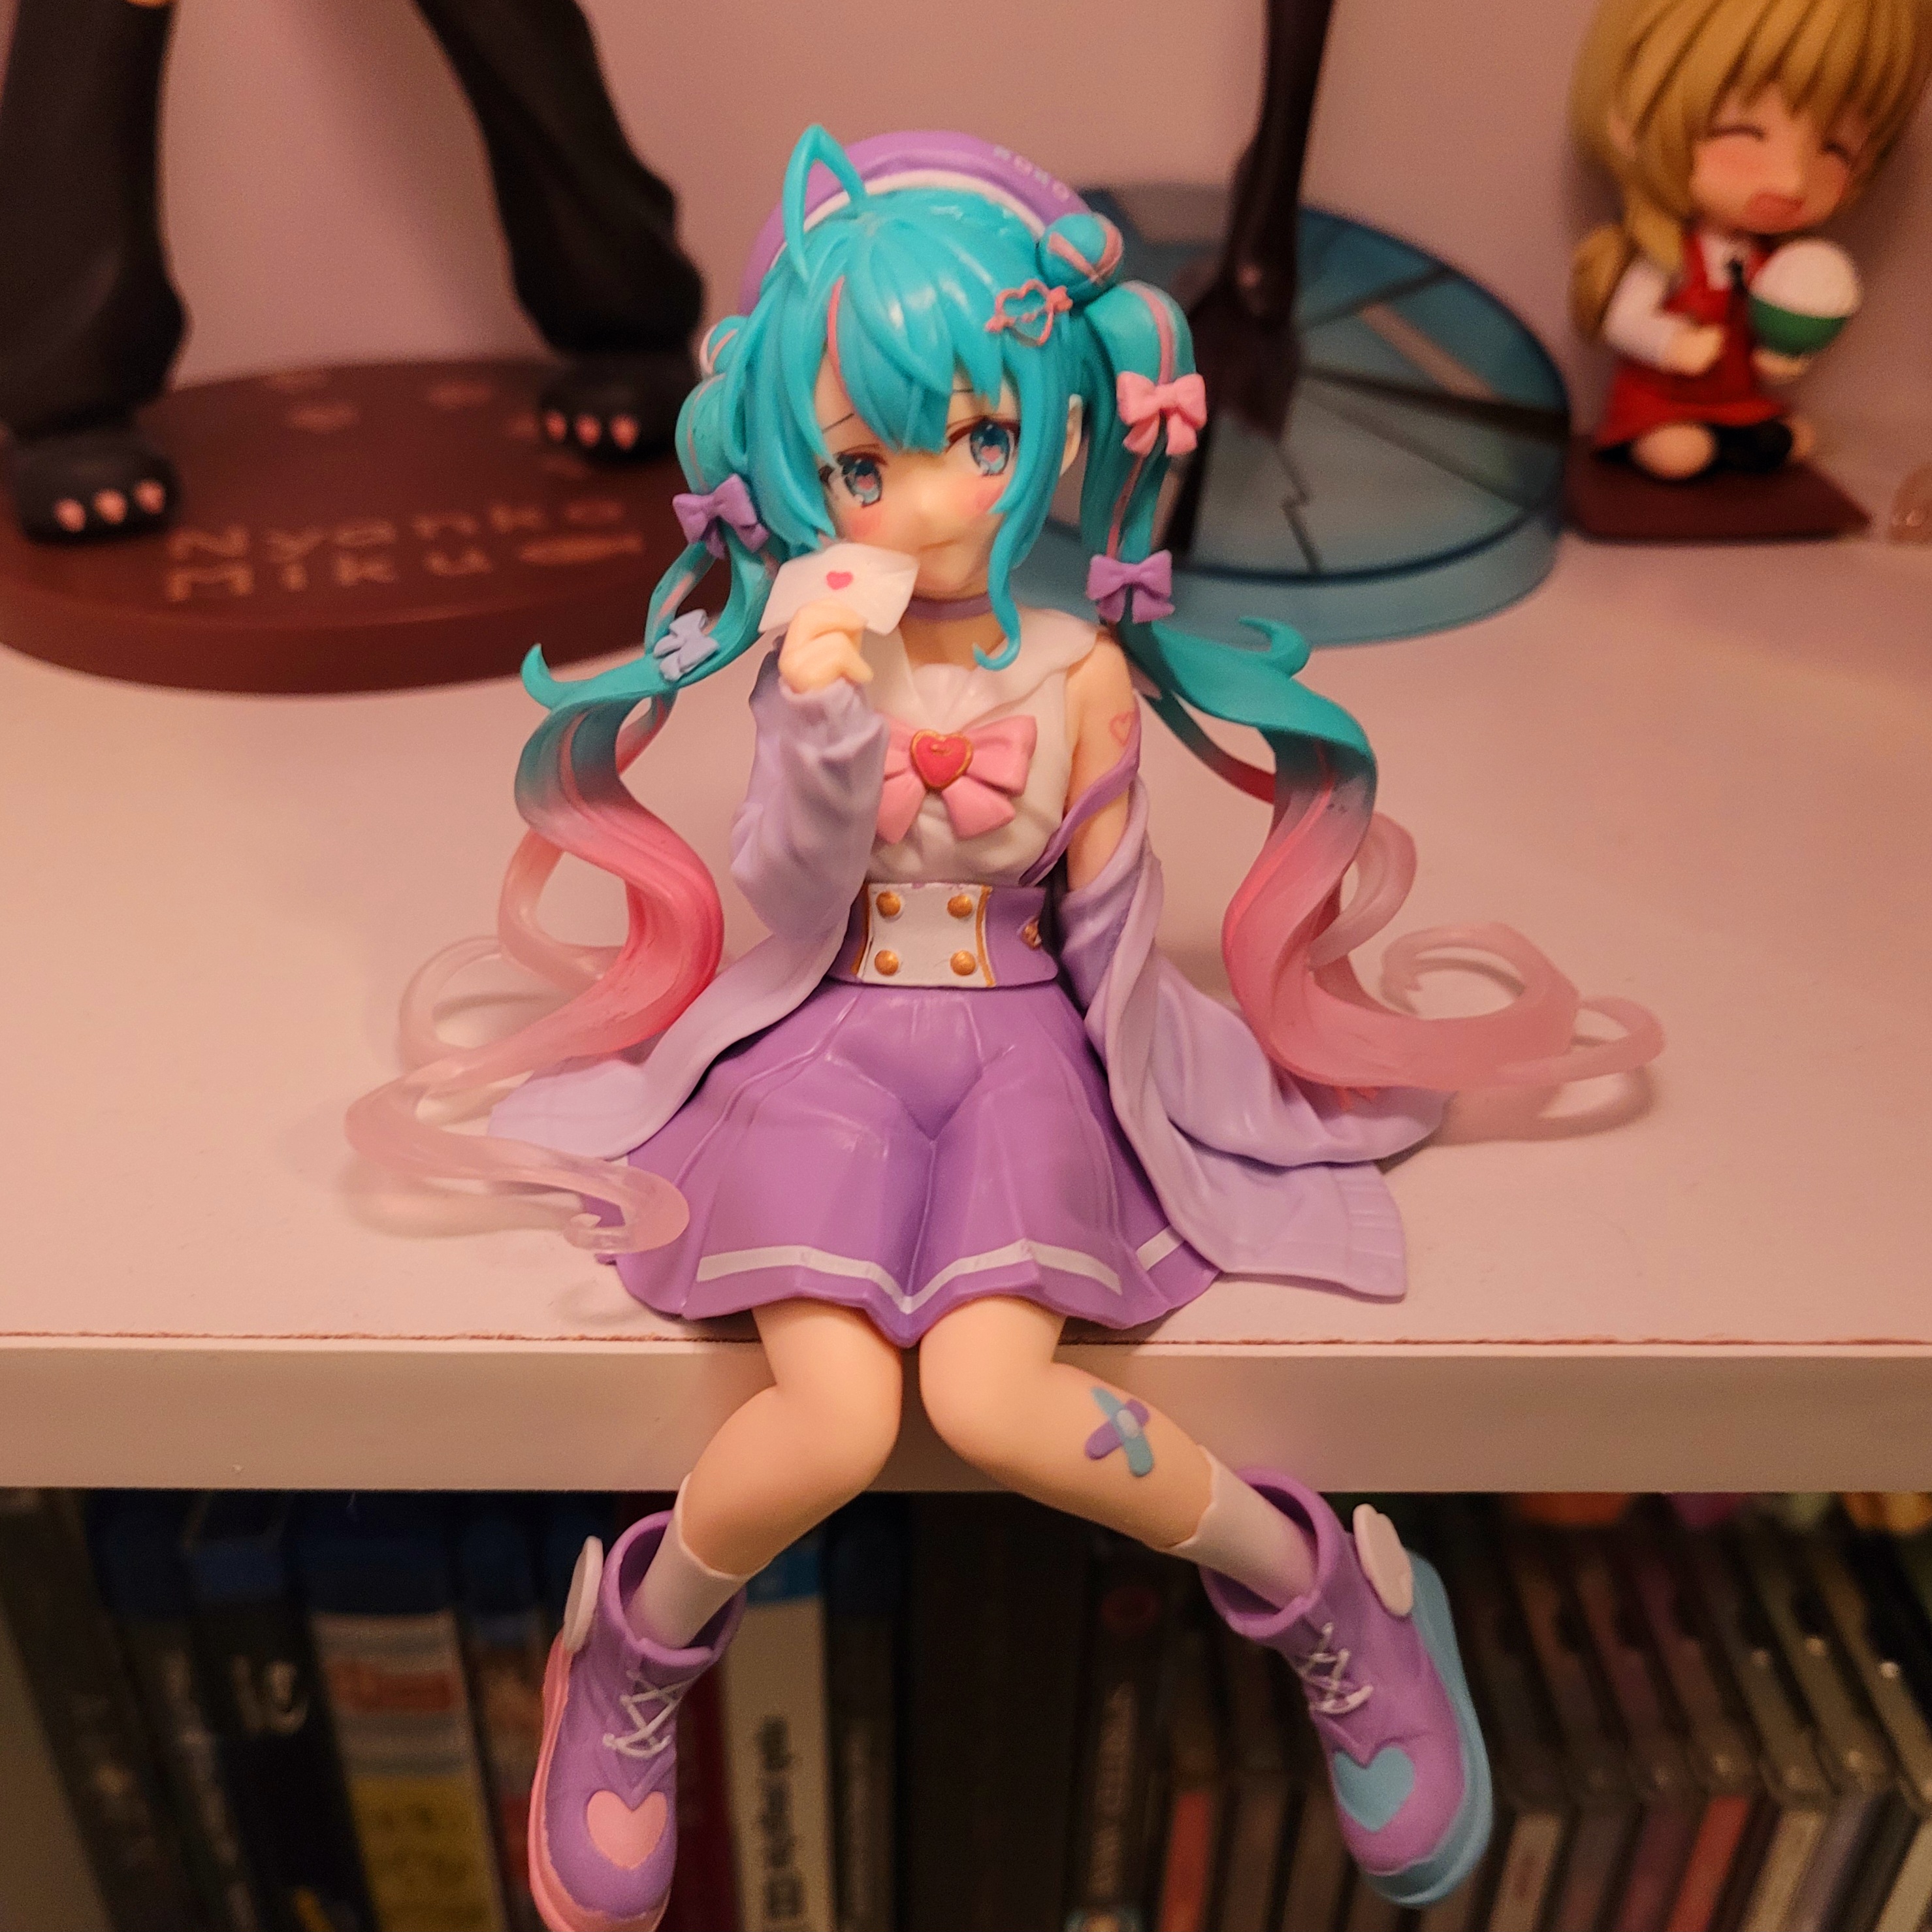 a photo of a miku figure. she is sitting, holding a small envelope with a pink heart on it. her outfit is primarily purple, featuring a purple skirt with suspenders, white shirt with a pink bow with a heart on it, and a light purple sweater. she also wears a purple beret. her pigtails have small hair buns tied near the top, and her pigtails fade from light blue to pink near the ends. there are also a few small purple and pink hair bows in each pigtail. she wears purple high top shoes with small white wings on the outer side of each, with the heart on the toe of the left shoe being pink and the heart on the toe of the right shoe being blue, as well as white socks with scalopped edges. she has a set of purple and blue bandaids on one of her legs.